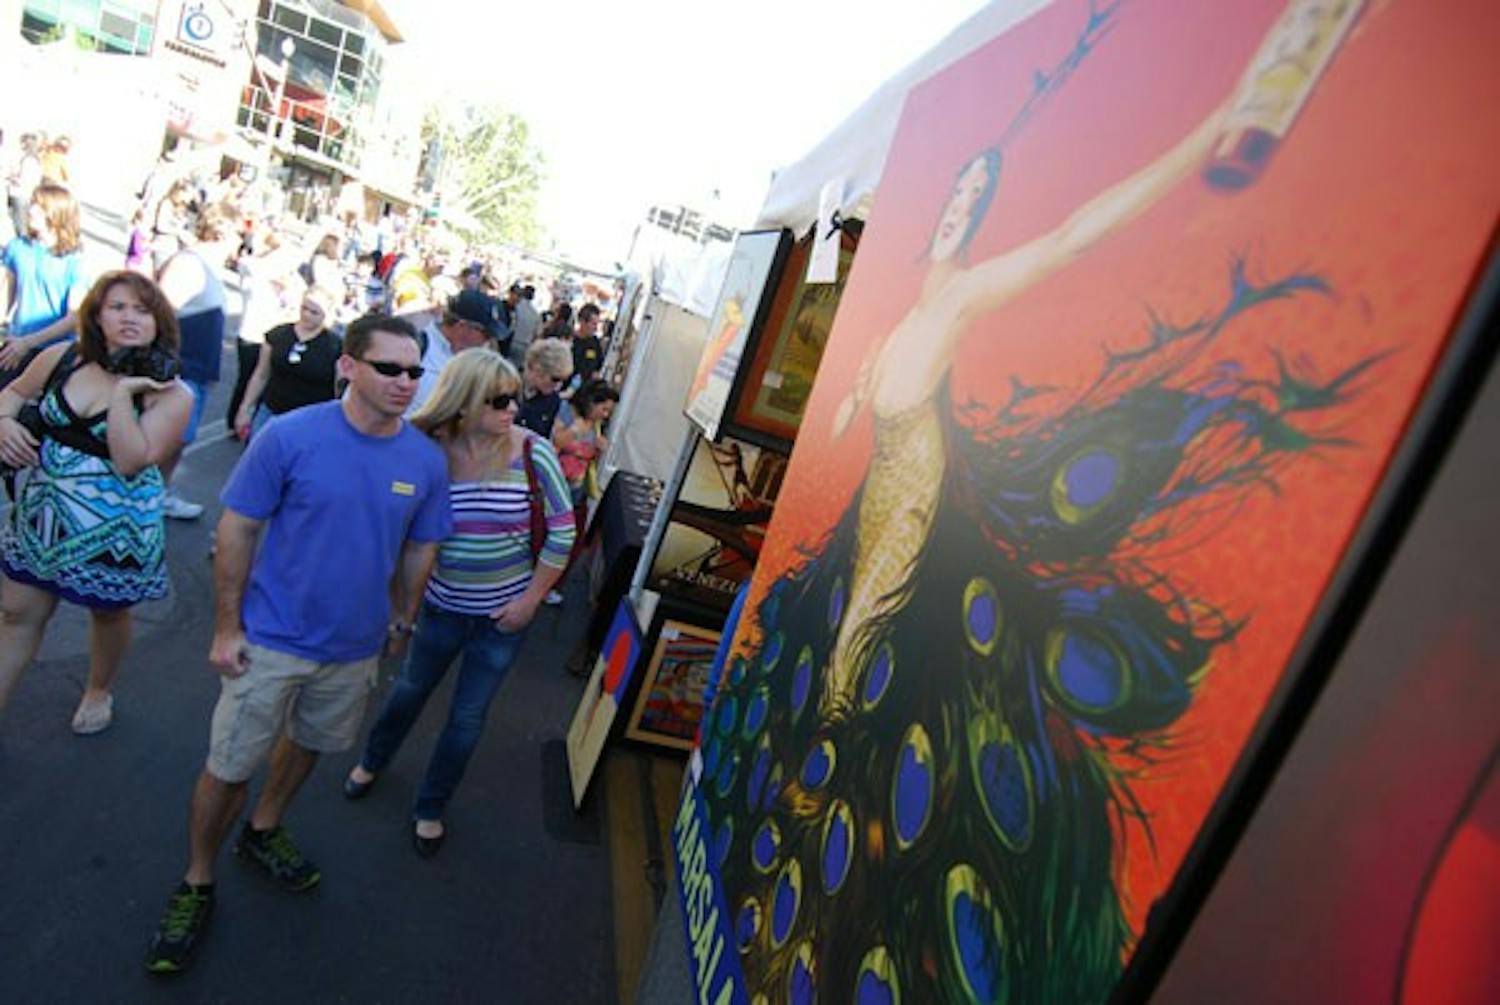 Voila Vintage of West Hills, Calif., showcased their art nouveau prints along with other classic paintings at the Tempe Festival of the Arts on Mill Avenue last weekend. (Photo by Murphy Bannerman)